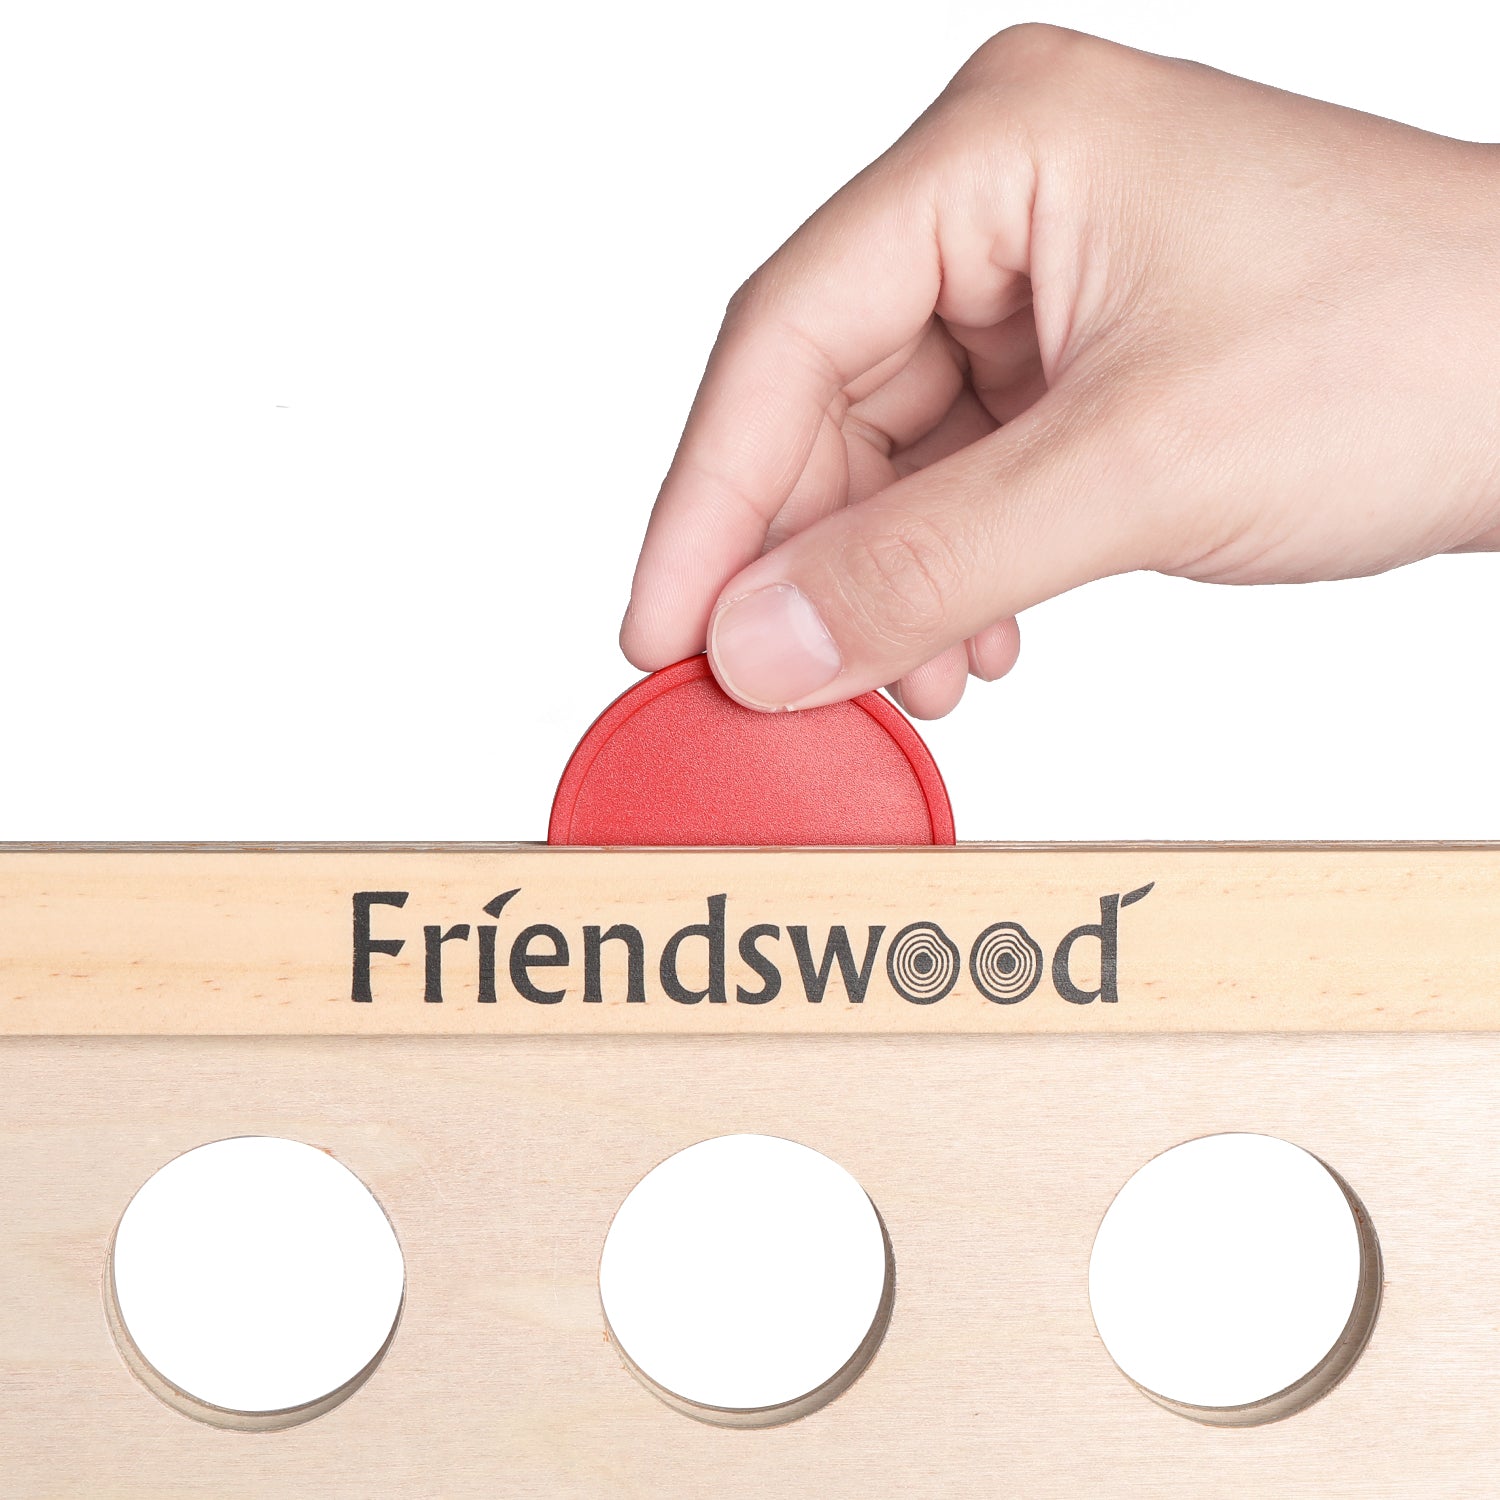 A11N SPORTS Sporting Goods > Outdoor Recreation > Outdoor Games > Lawn Games Friendswood 4 in a Row Classic Connect 4 Game, 20 x 20 inch Board